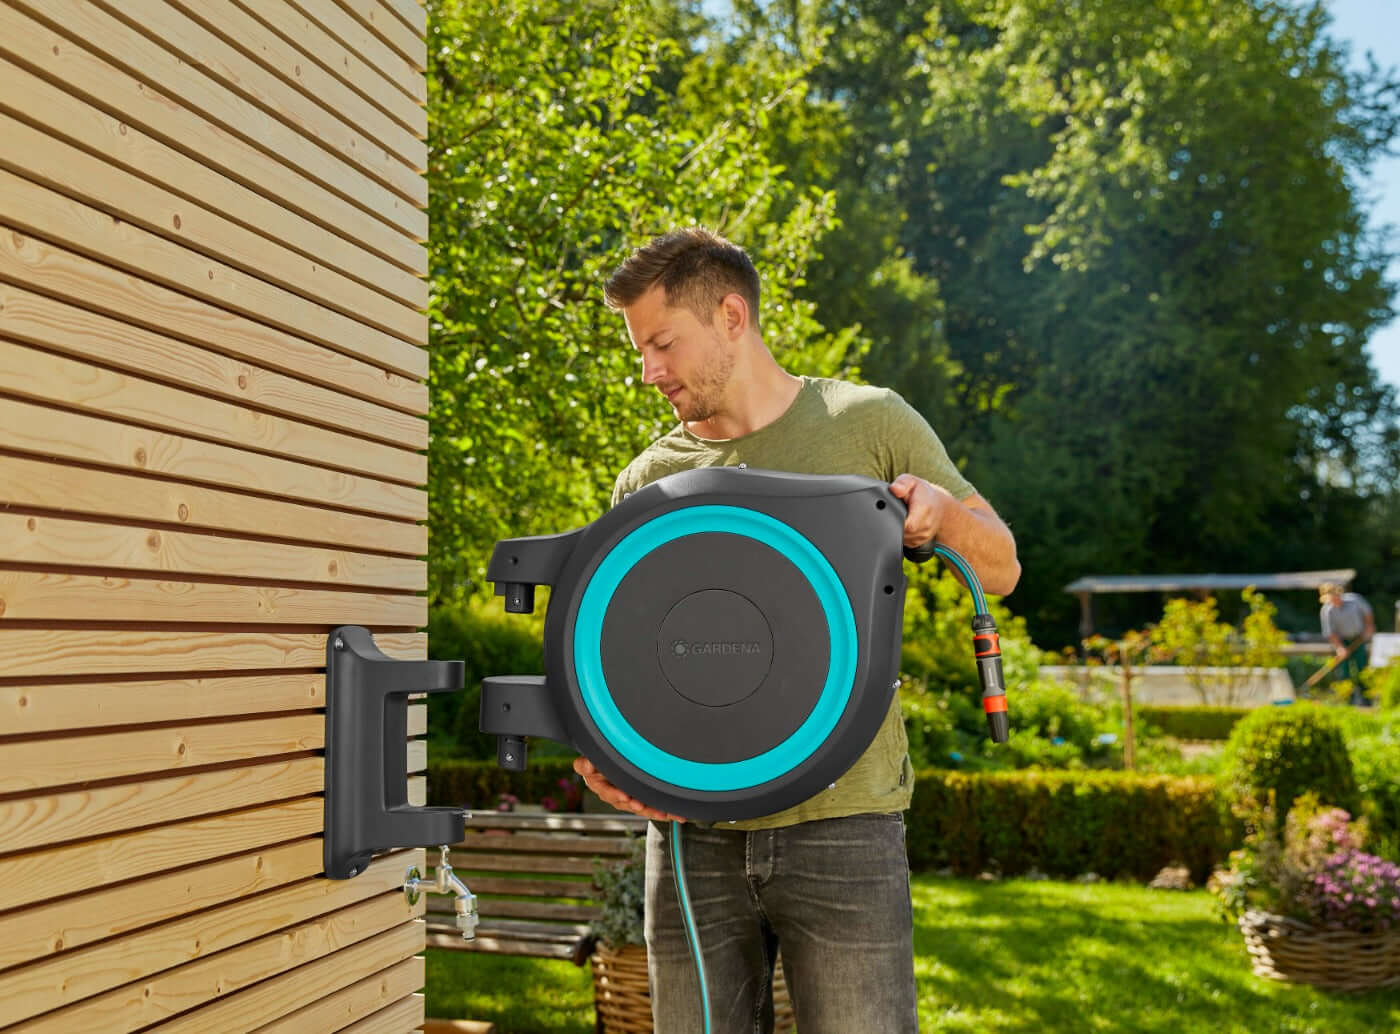 How to install your Gardena wall mounted hose reel in 7 steps